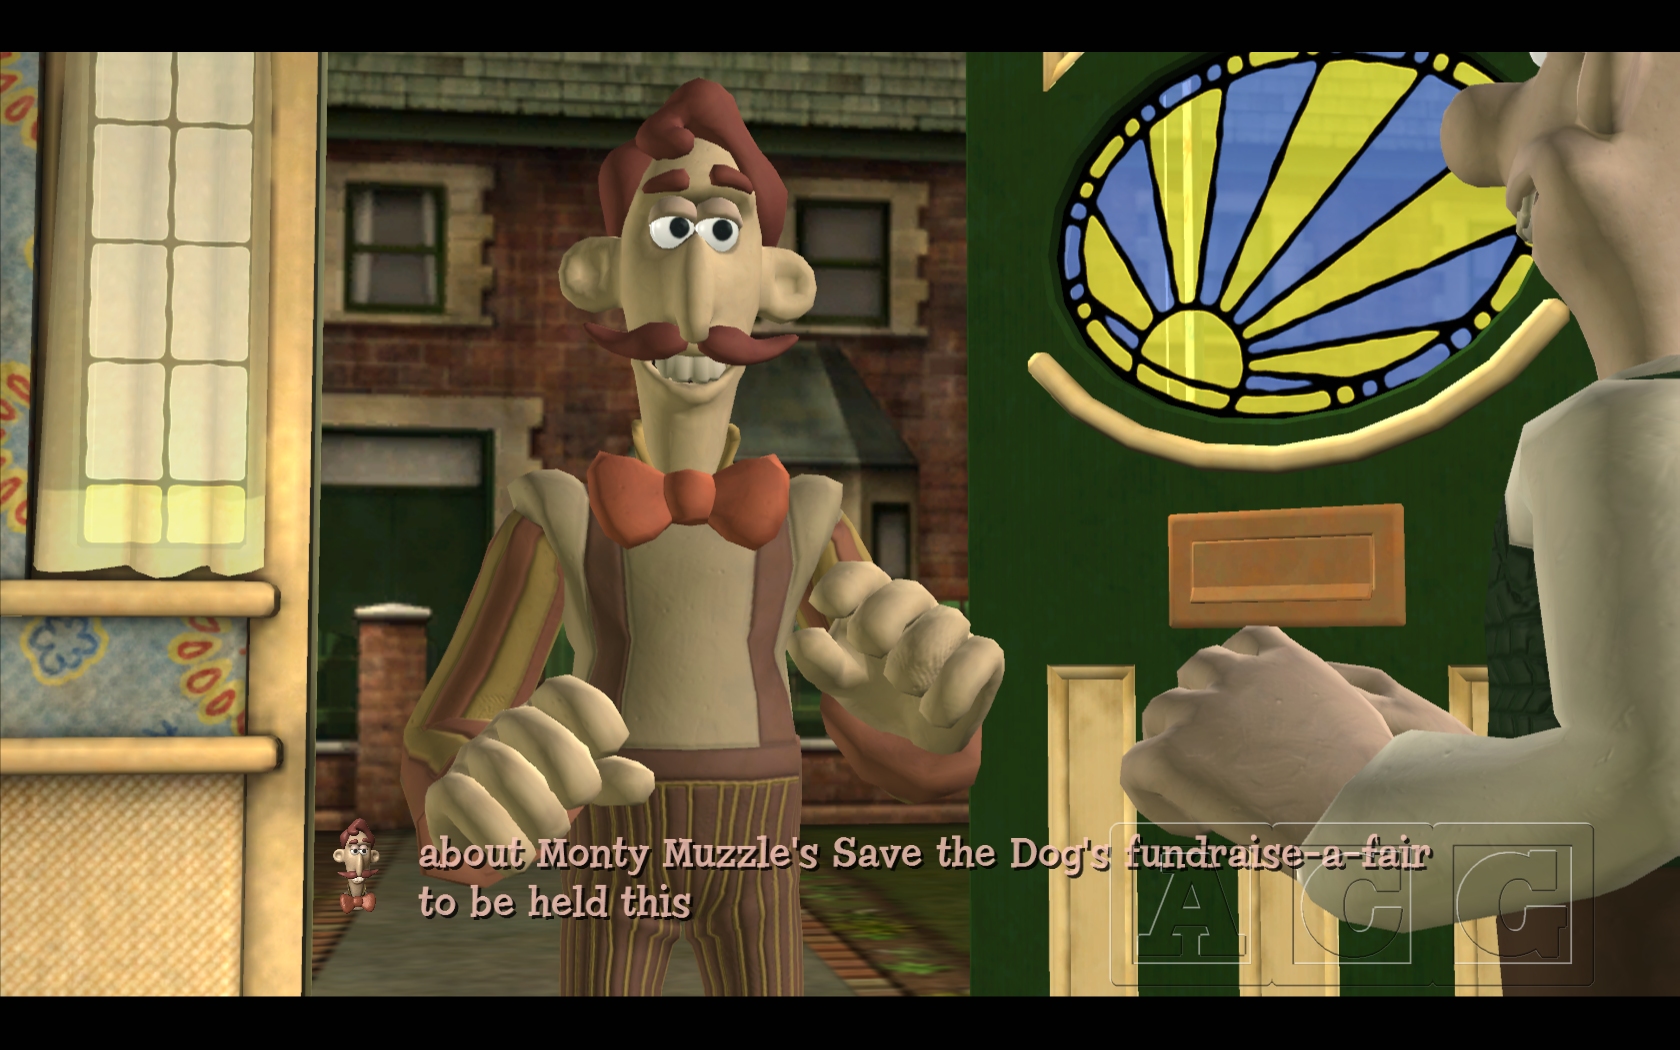 Wallace & Gromit's Grand Adventures Episode 3: Muzzled!